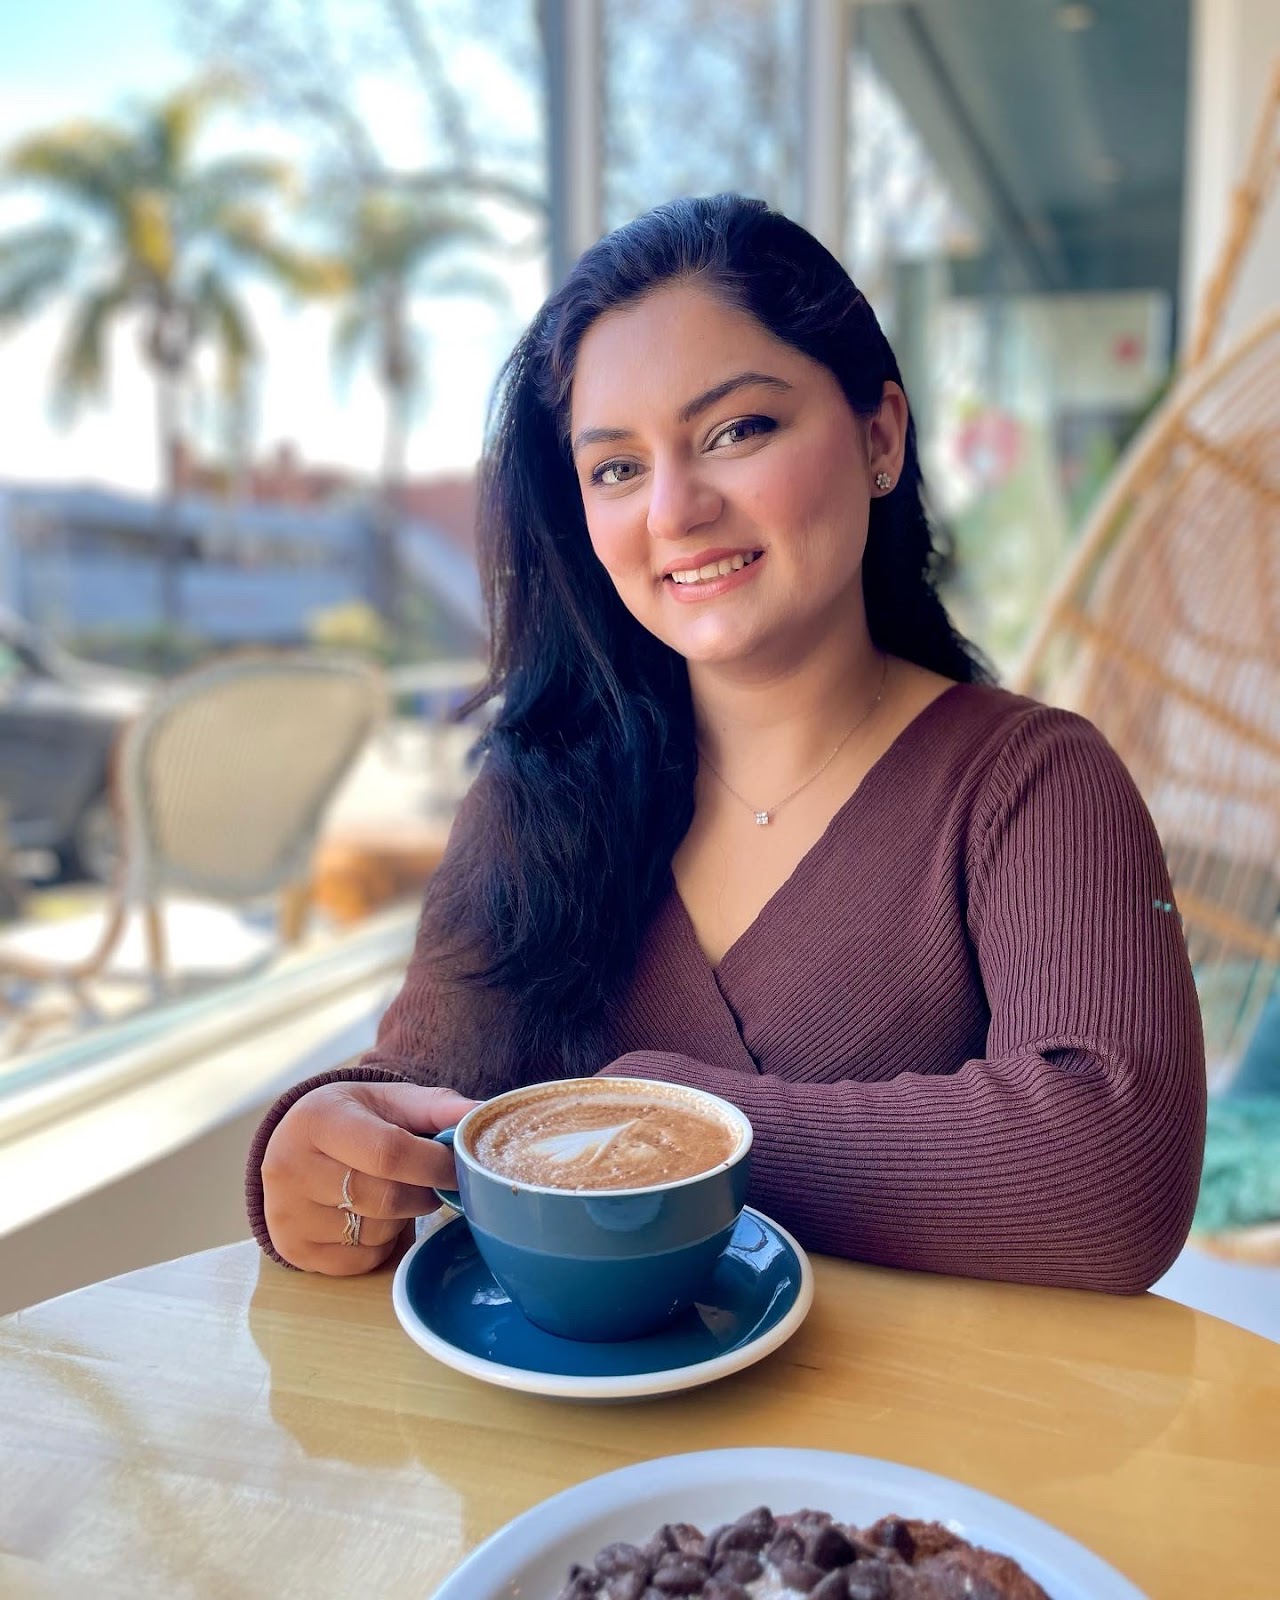 Photo of Jigyasa Grover, holding a cup of coffee, smiling